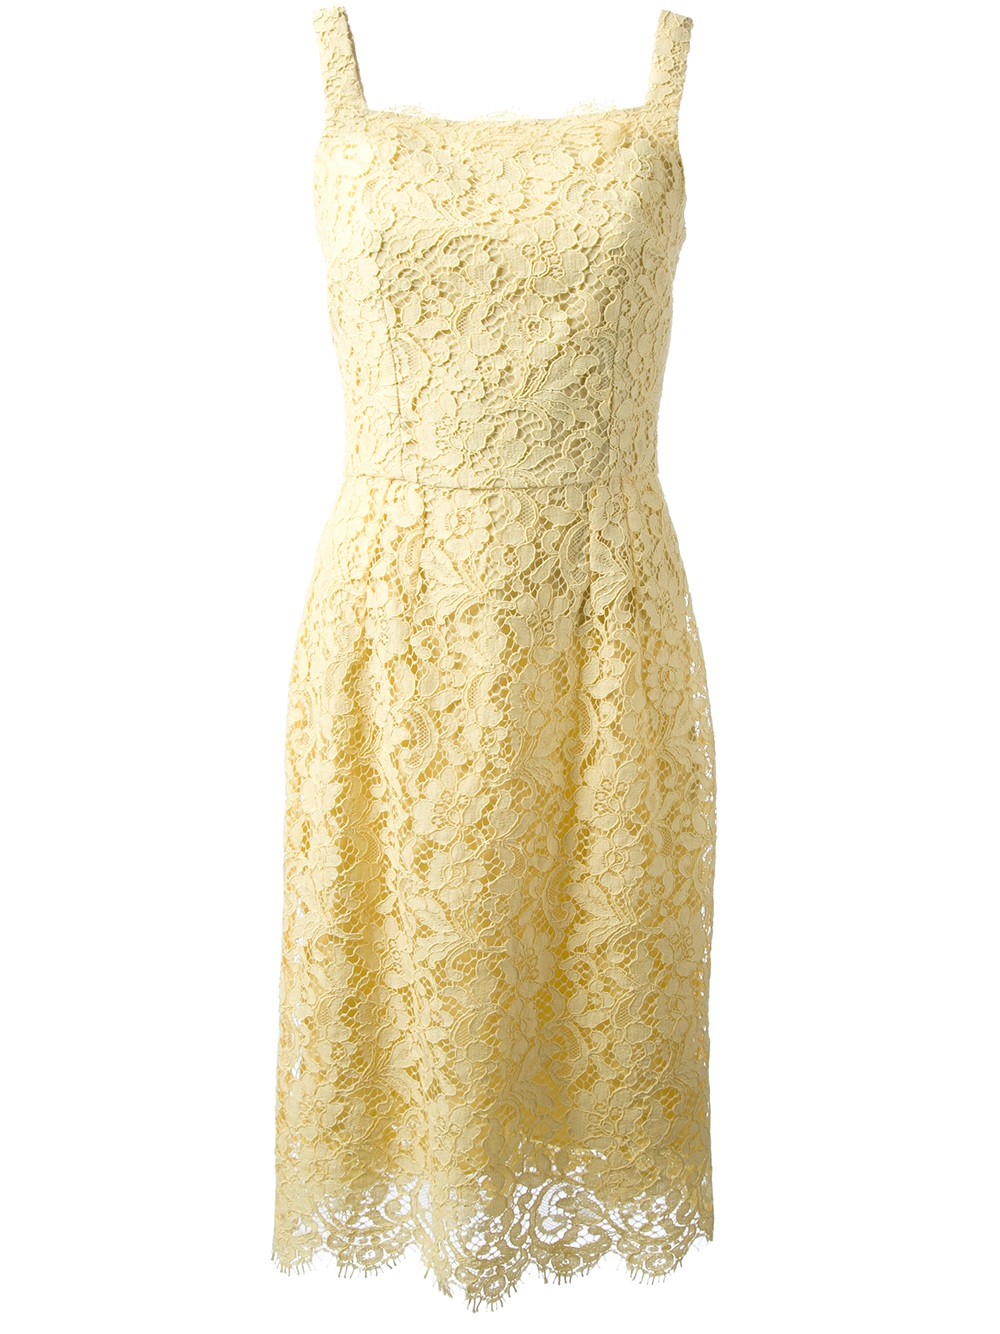 Lyst - Dolce & Gabbana Floral Lace Dress in Yellow